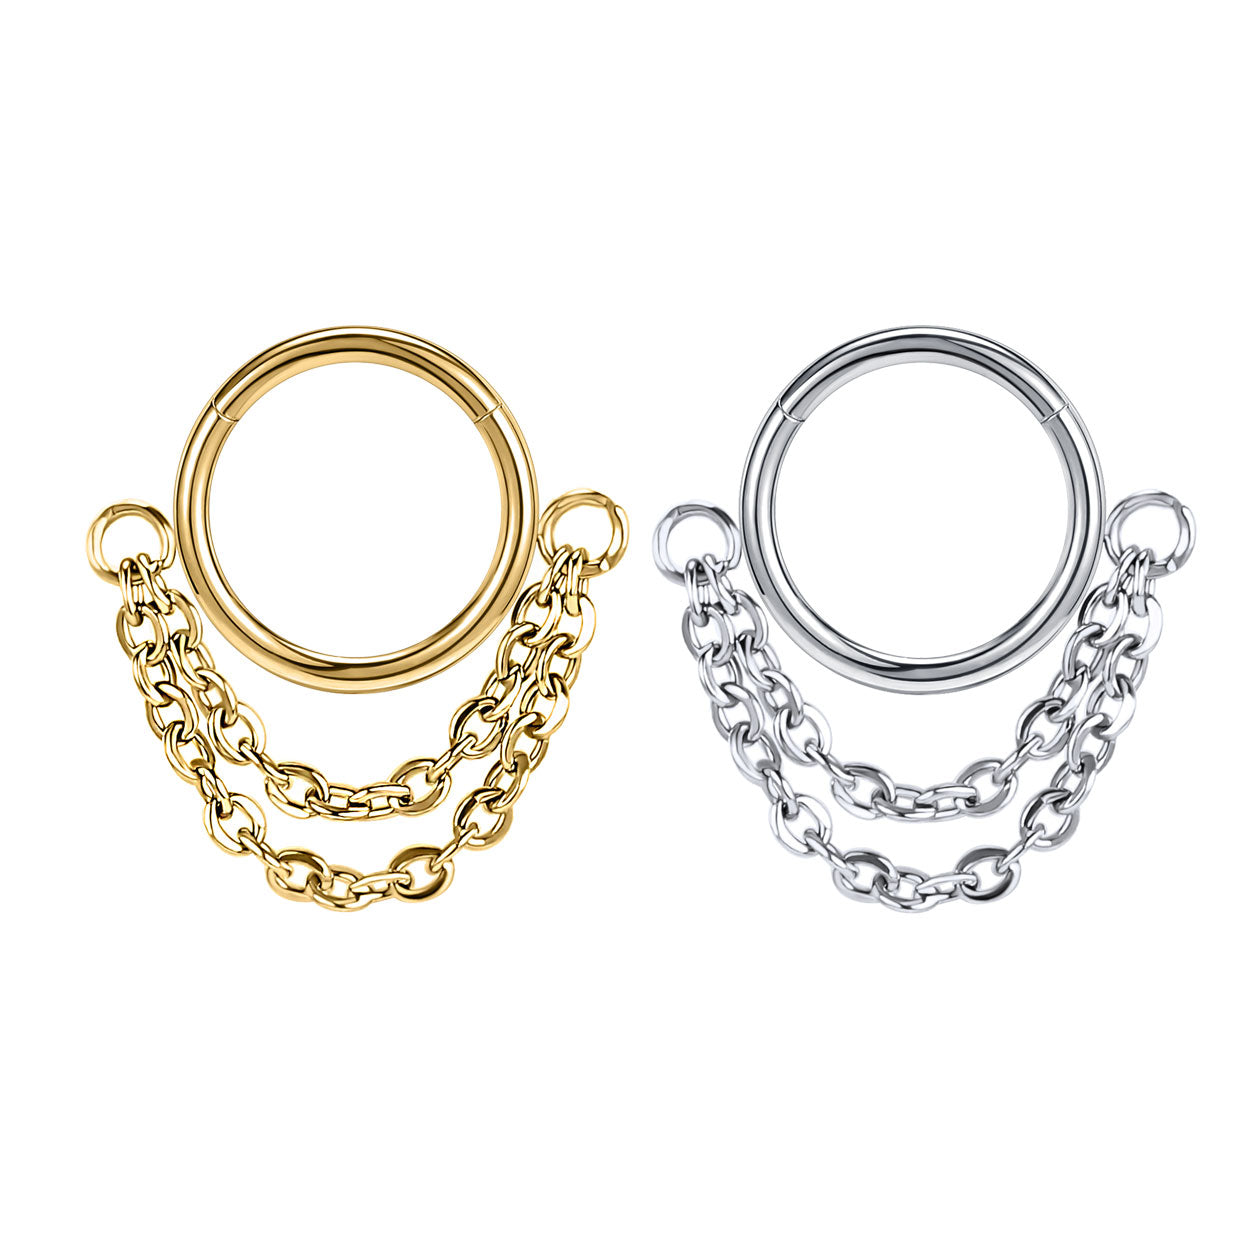 16g-gothic-double-chains-nose-septum-ring-gold-sliver-clicker-stainless-steel-helix-cartilage-piercing